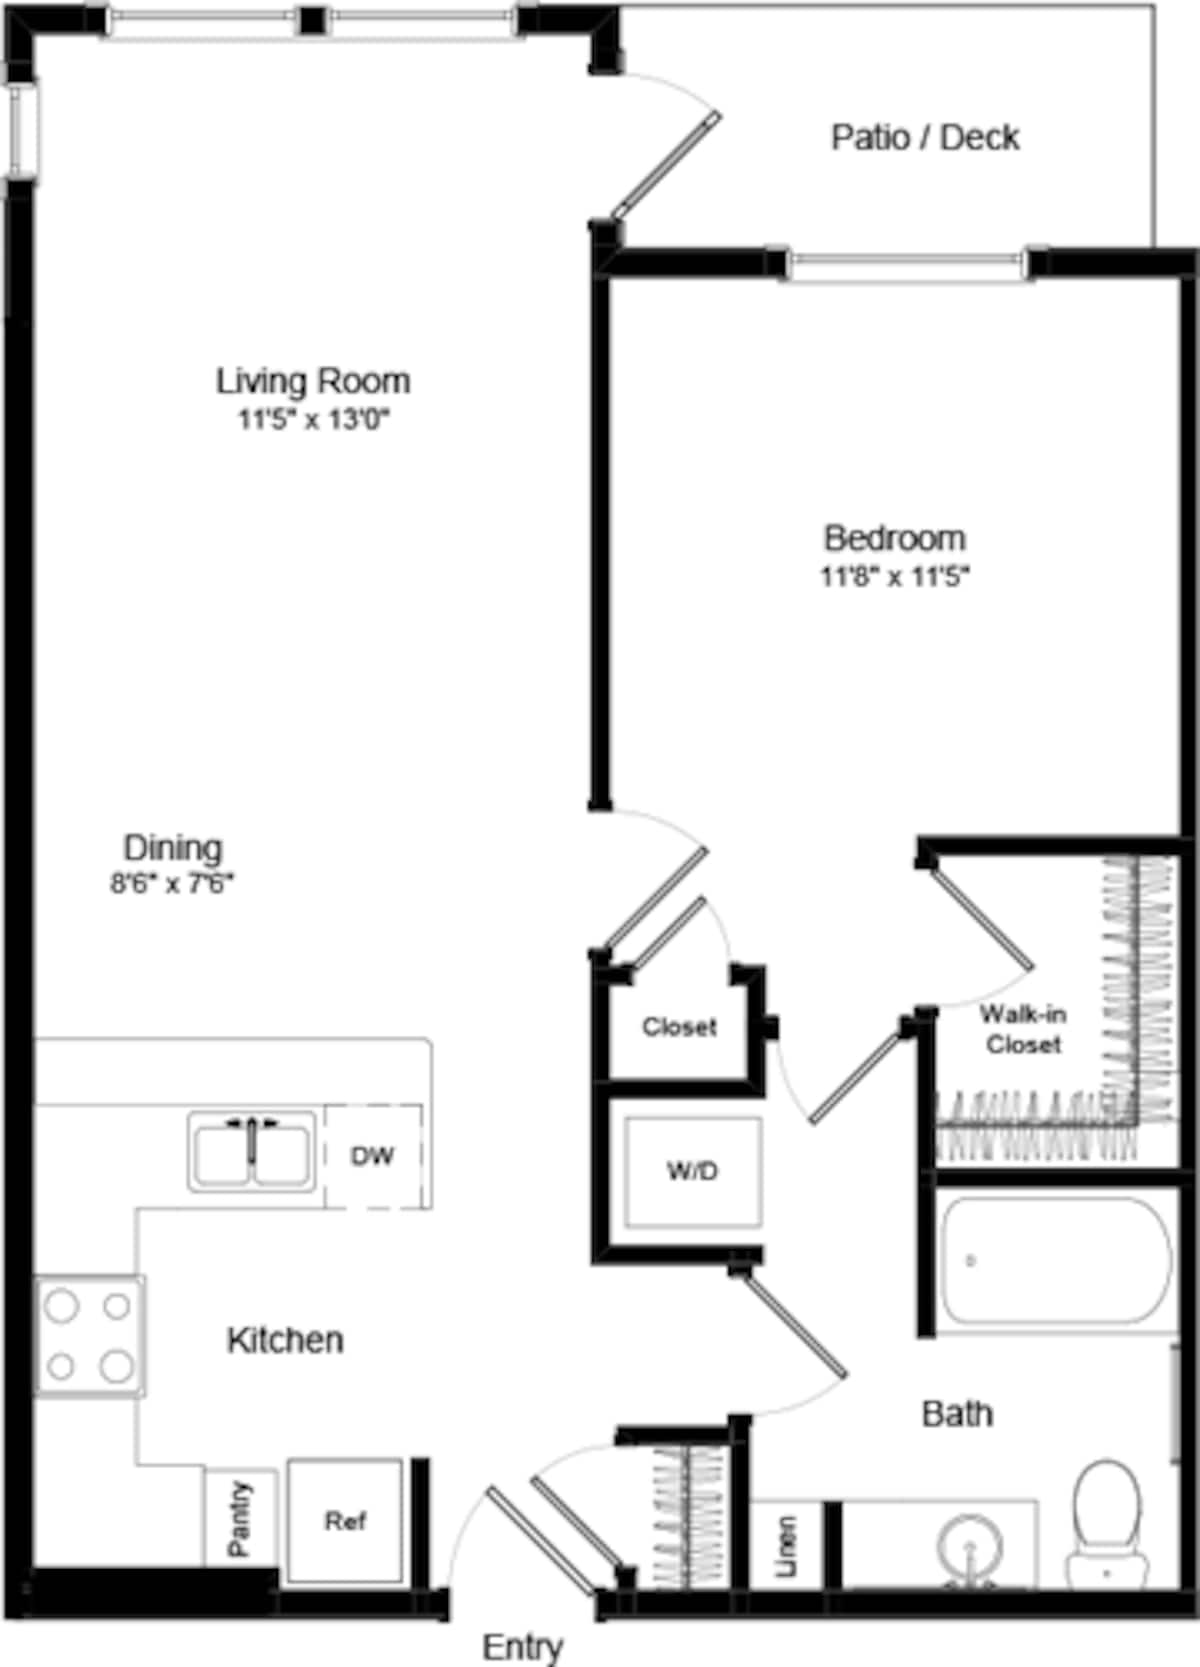 Floorplan diagram for One Bed A-2 - Phase III, showing 1 bedroom